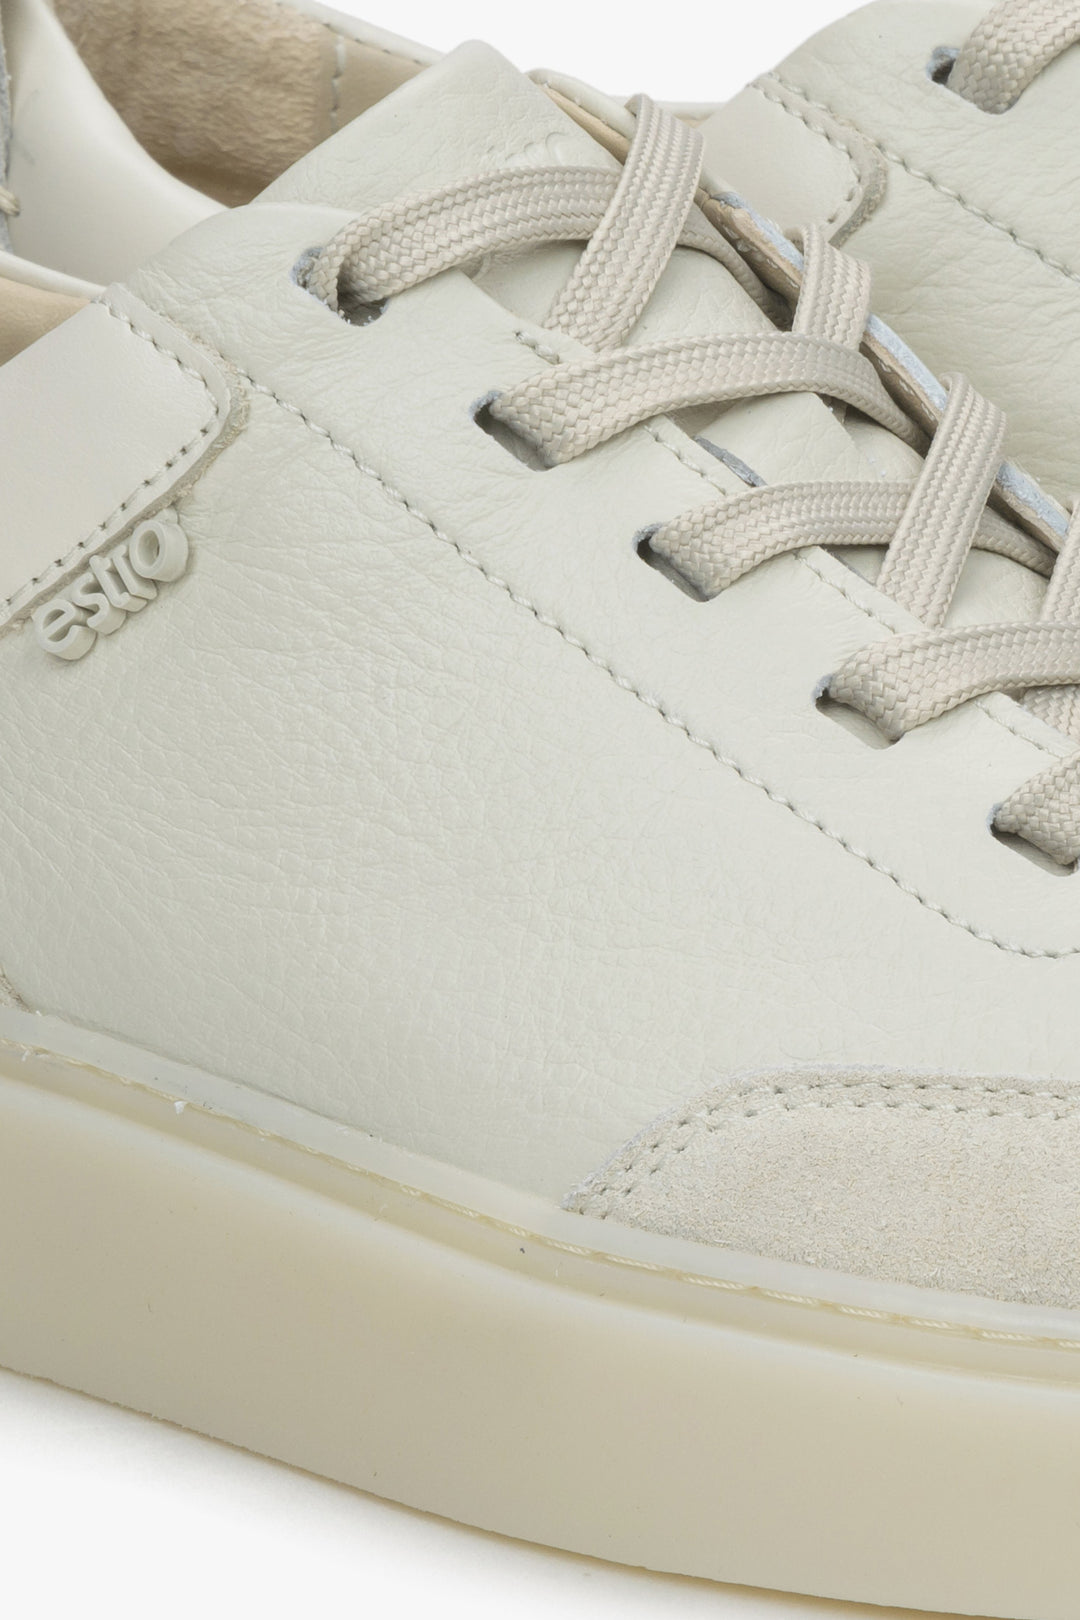 Beige women's sneakers made of genuine leather and velour by Estro - close-up on details.